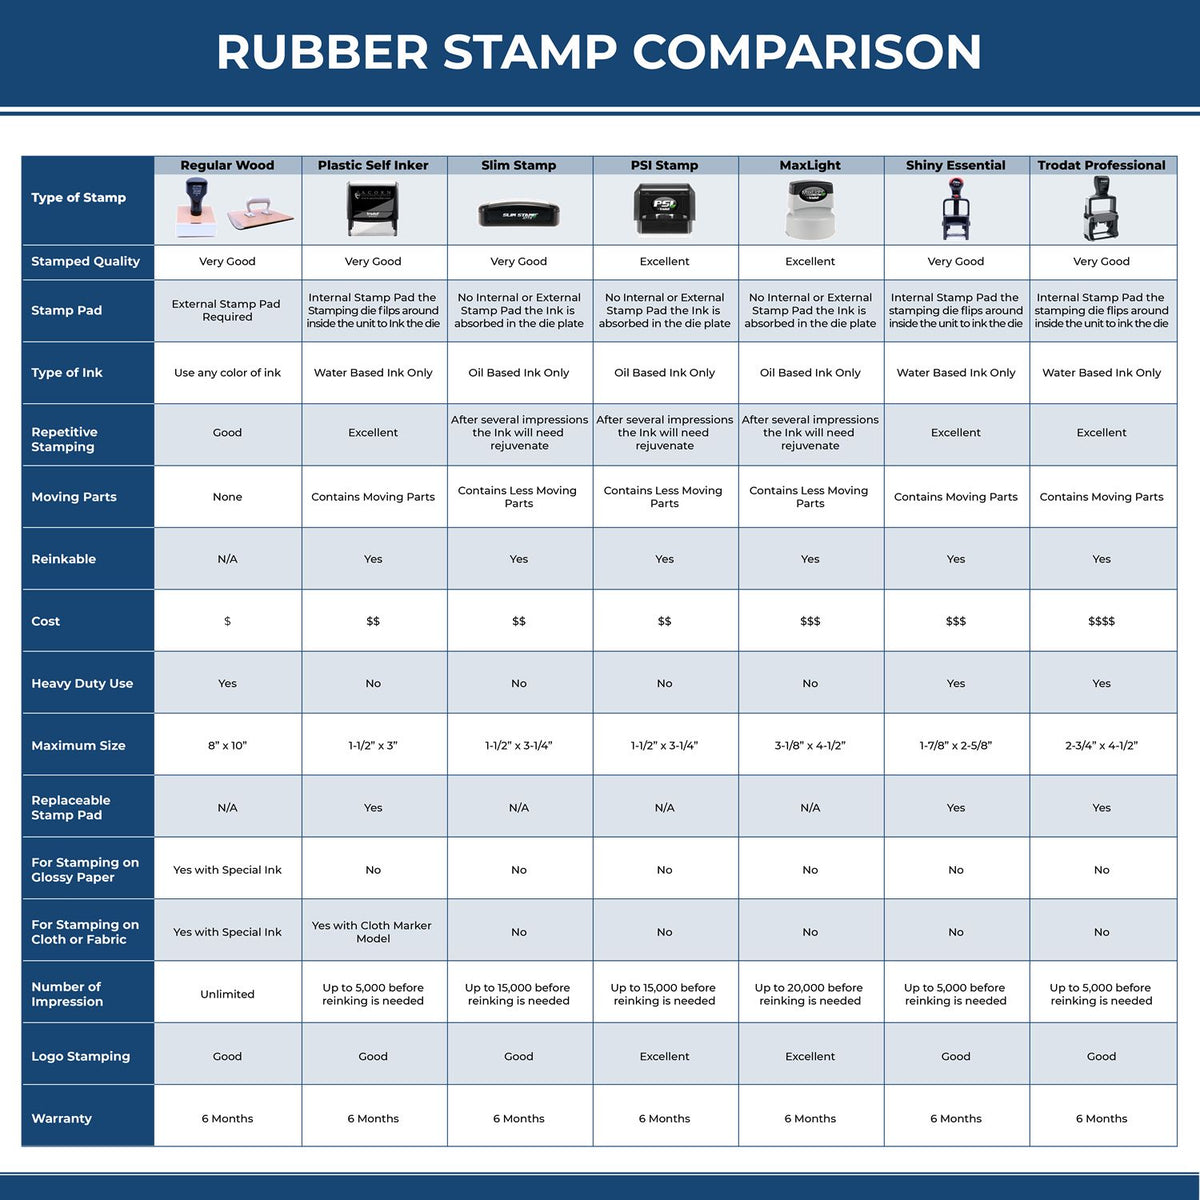 Large Pacemaker Rubber Stamp 4522R Rubber Stamp Comparison